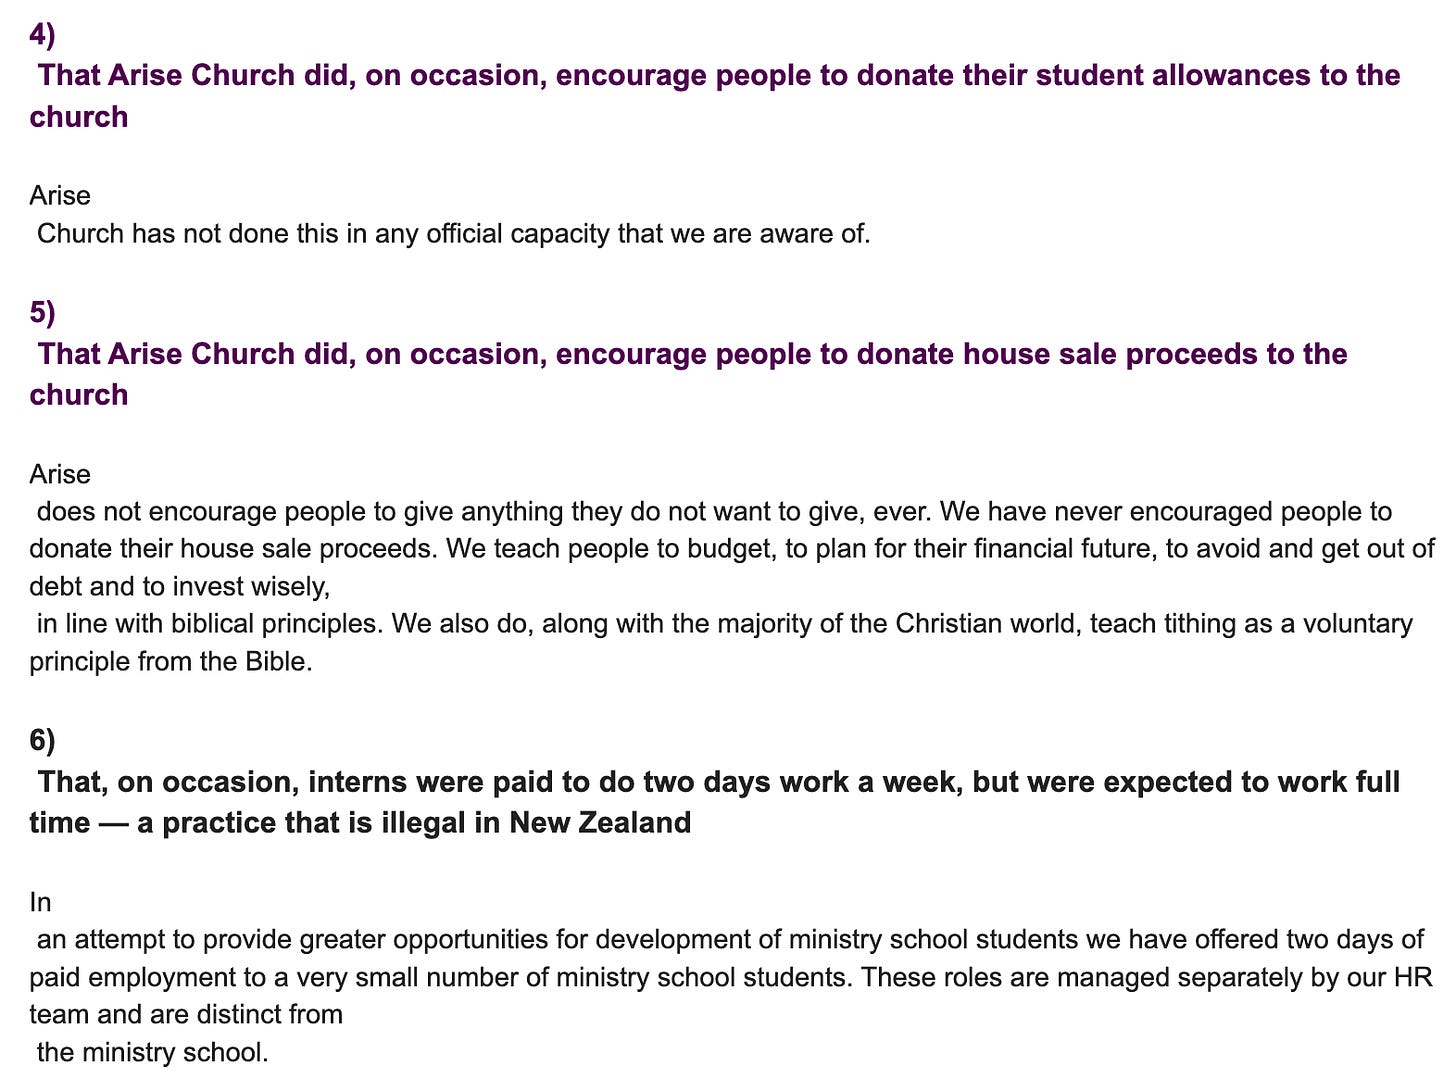 "4)  That Arise Church did, on occasion, encourage people to donate their student allowances to the church  Arise  Church has not done this in any official capacity that we are aware of.   5)  That Arise Church did, on occasion, encourage people to donate house sale proceeds to the church  Arise  does not encourage people to give anything they do not want to give, ever. We have never encouraged people to donate their house sale proceeds. We teach people to budget, to plan for their financial future, to avoid and get out of debt and to invest wisely,  in line with biblical principles. We also do, along with the majority of the Christian world, teach tithing as a voluntary principle from the Bible.   6)  That, on occasion, interns were paid to do two days work a week, but were expected to work full time — a practice that is illegal in New Zealand  In  an attempt to provide greater opportunities for development of ministry school students we have offered two days of paid employment to a very small number of ministry school students. These roles are managed separately by our HR team and are distinct from  the ministry school."